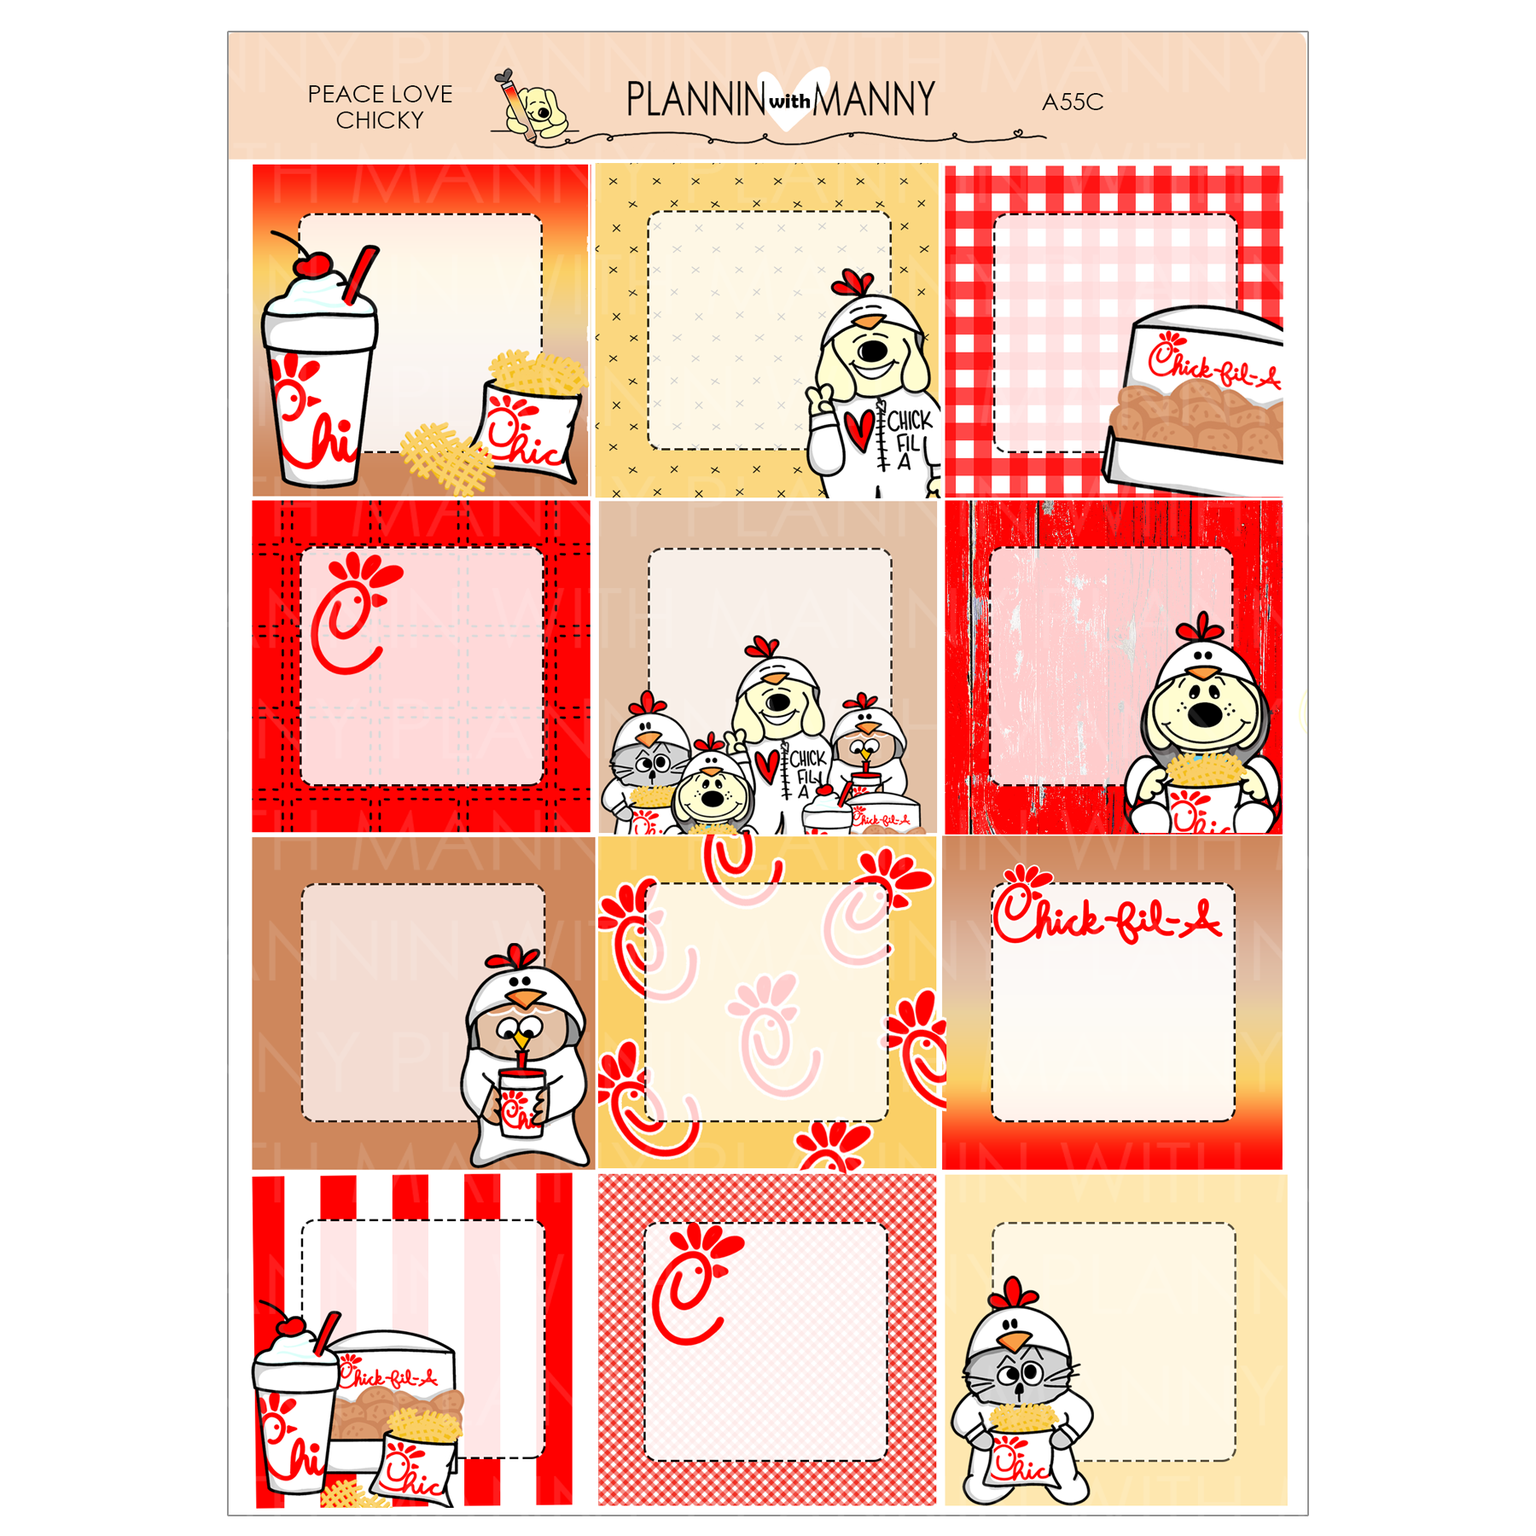 A55C Peace Love Chicky 1.5" Square Planner Stickers